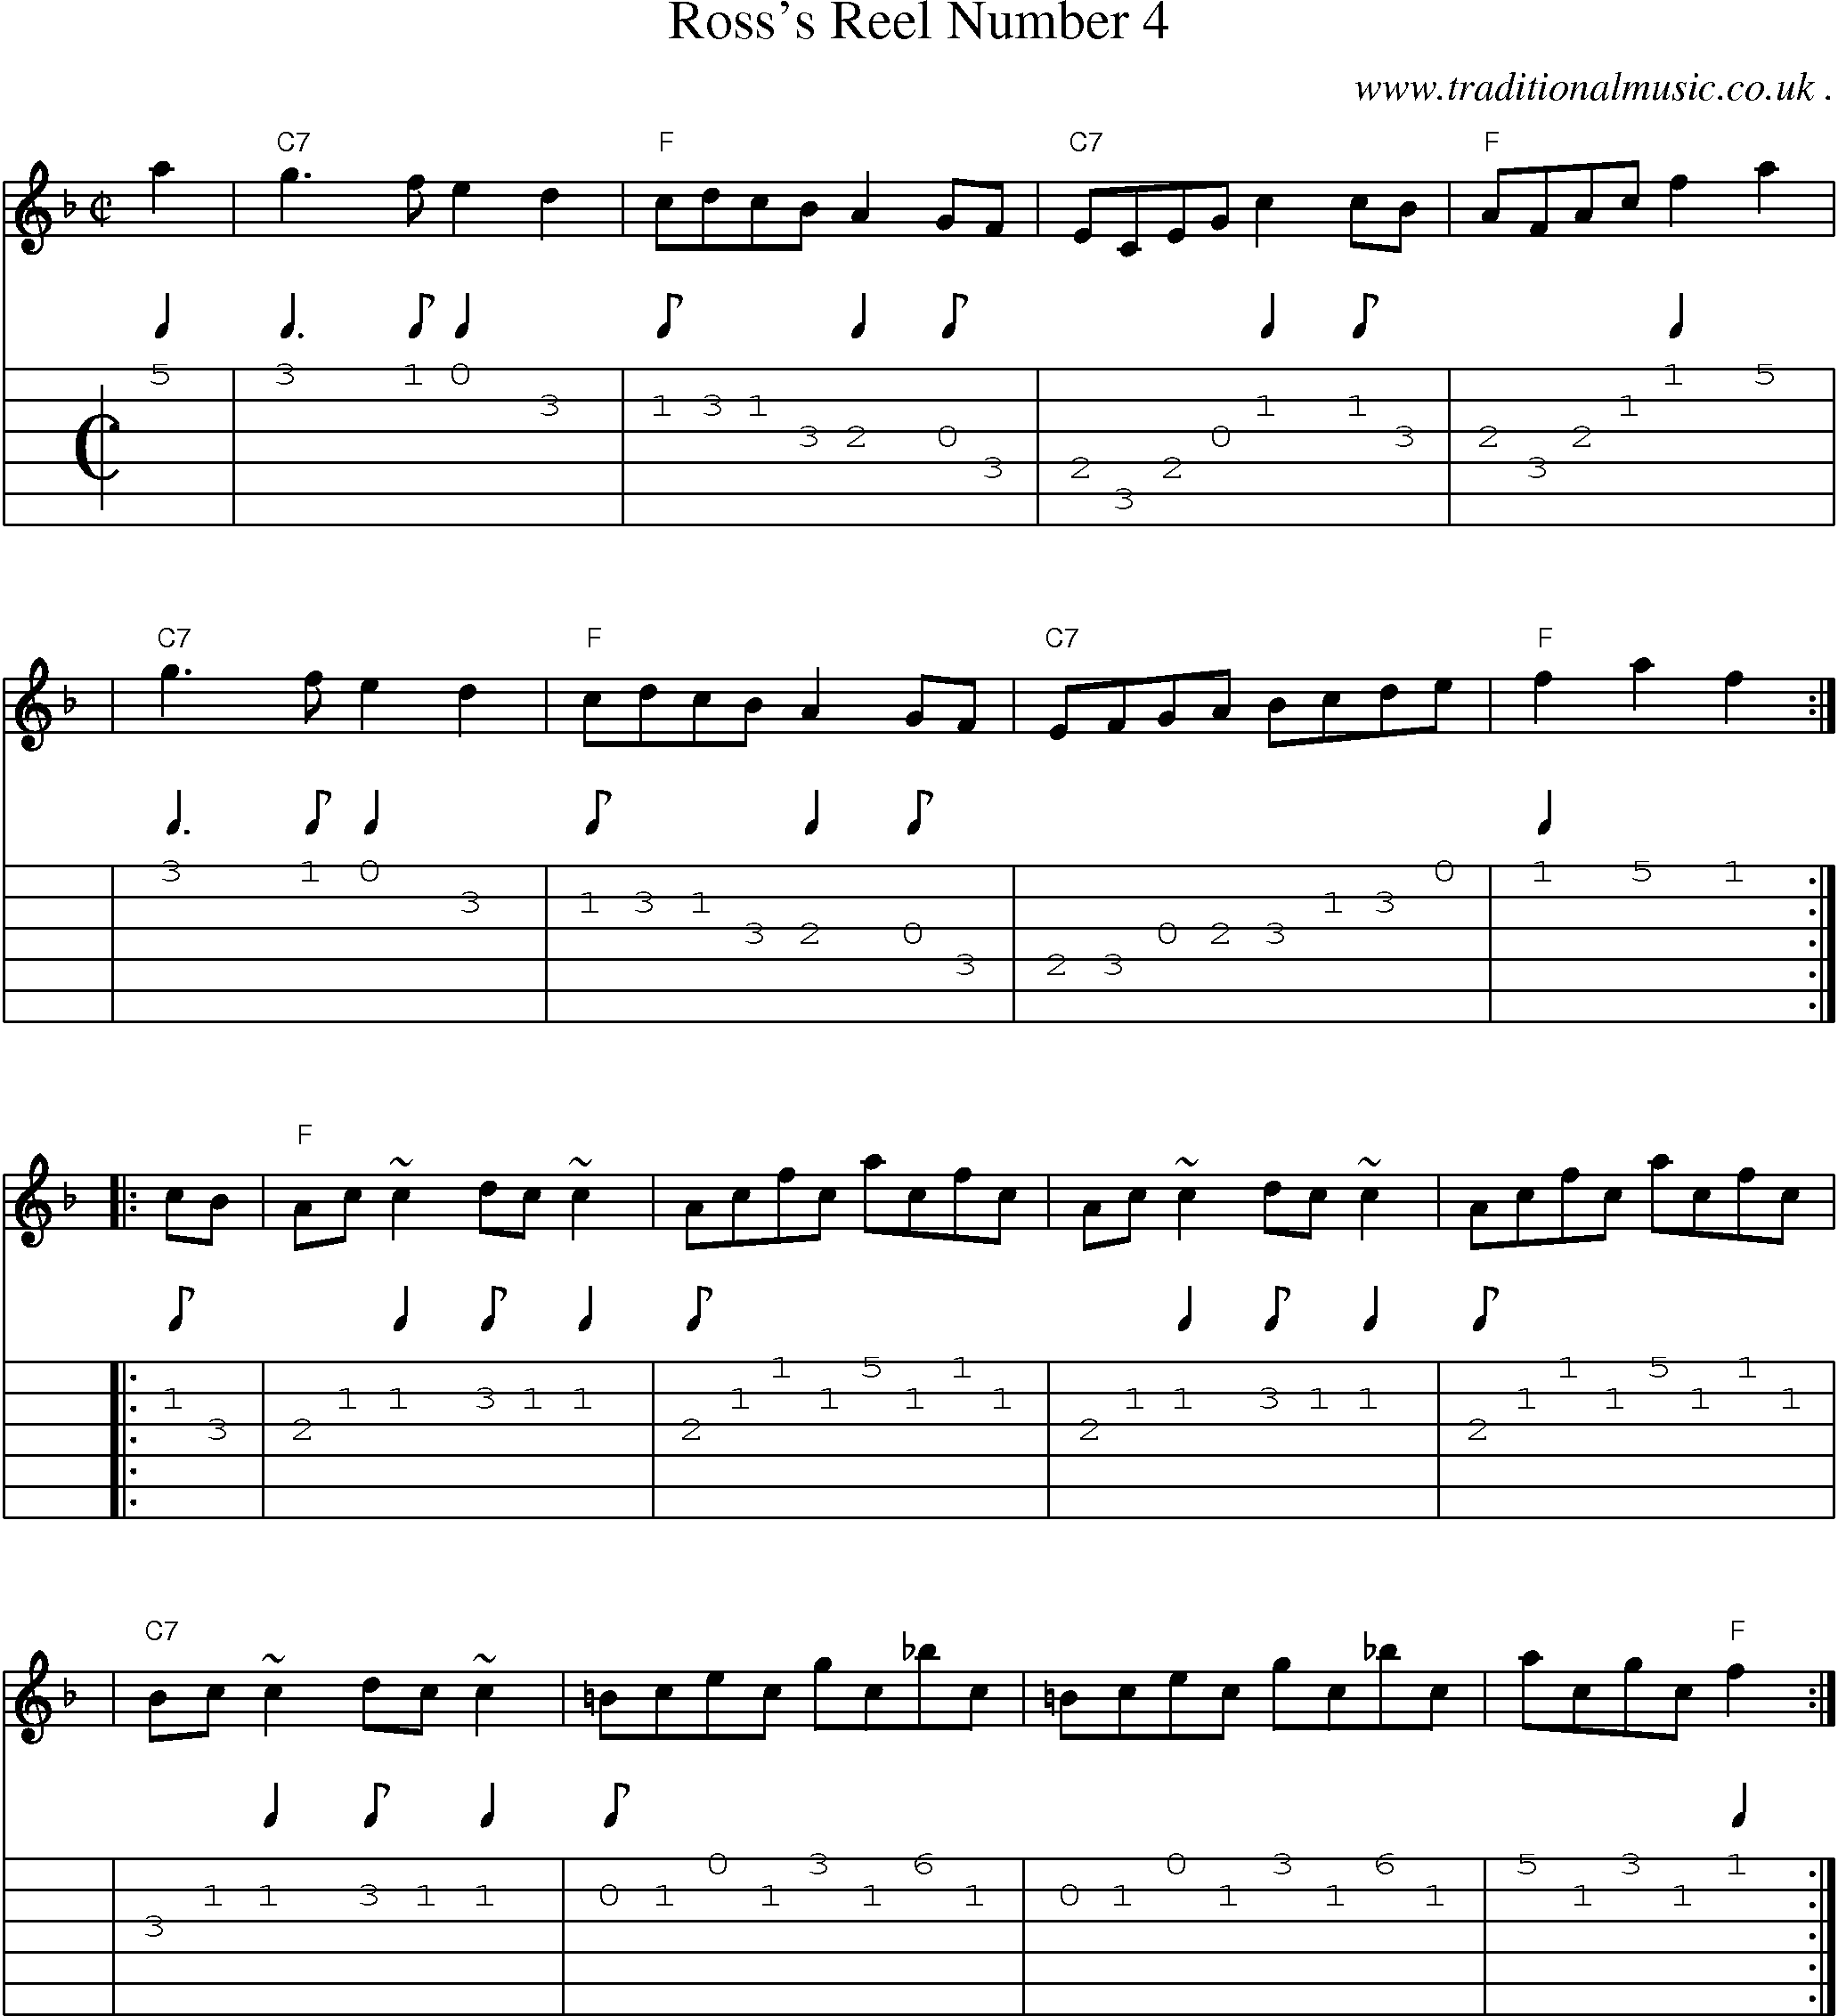 Sheet-music  score, Chords and Guitar Tabs for Rosss Reel Number 4